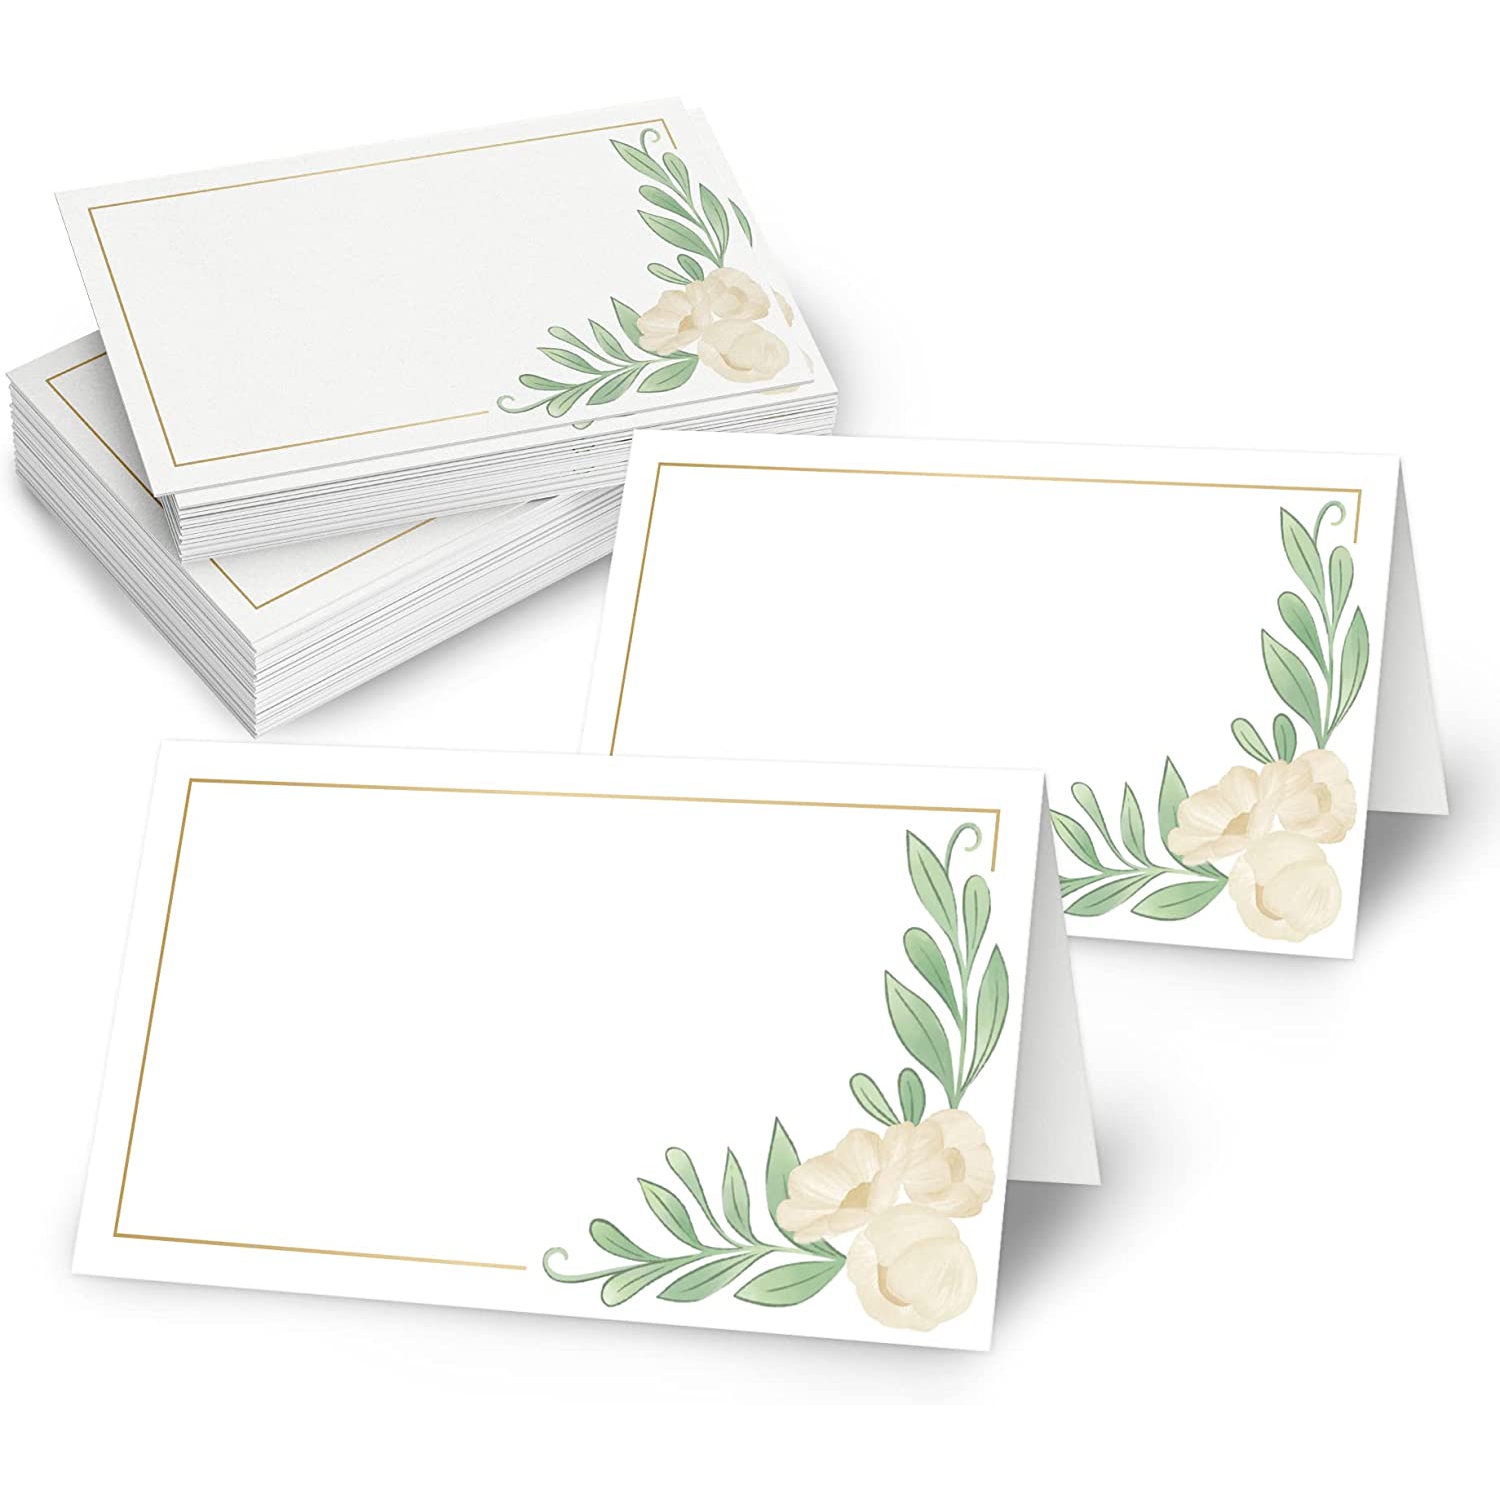 Rileys & Co 50 Pack Blank Placecards, White and Gold Foil Wedding Place Cards for Table Setting at Dinner Parties, Receptions, Double Sided for Guest Names, 2x3.5 Inches Folded